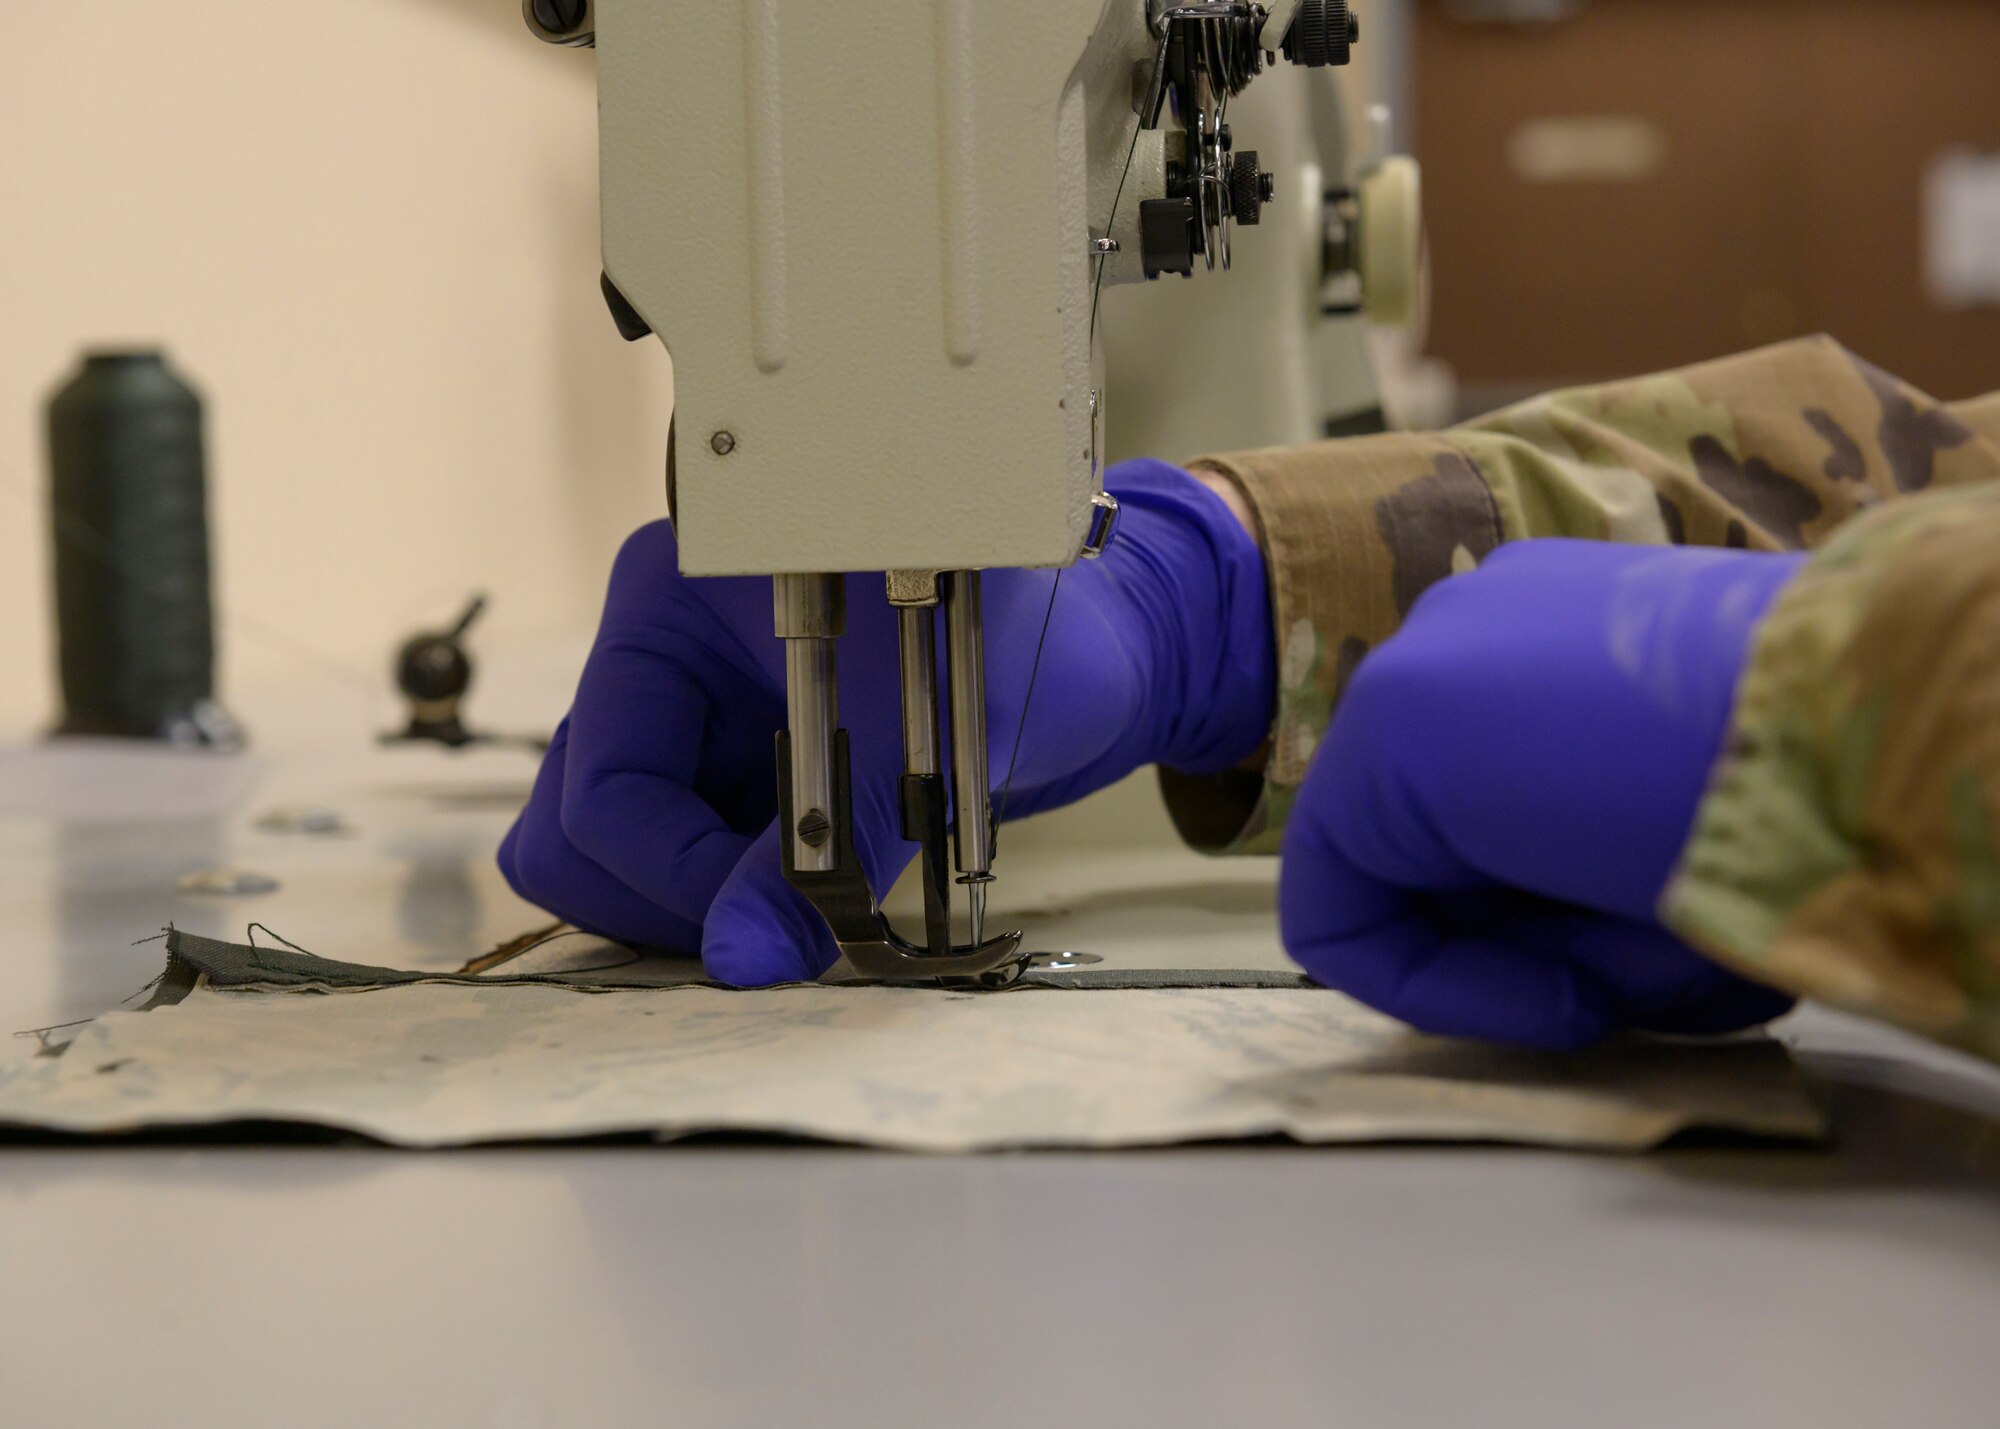 Airmen from the 36th Operations Support Squadron craft cloth masks, March 8, 2020, at Mountain Home Air Force Base. Amid the CVOID-19 pandemic, these masks will serve to prevent the spread of the virus while maintaining social distancing. (U.S. Air Force photo by Senior Airman Tyrell Hall)